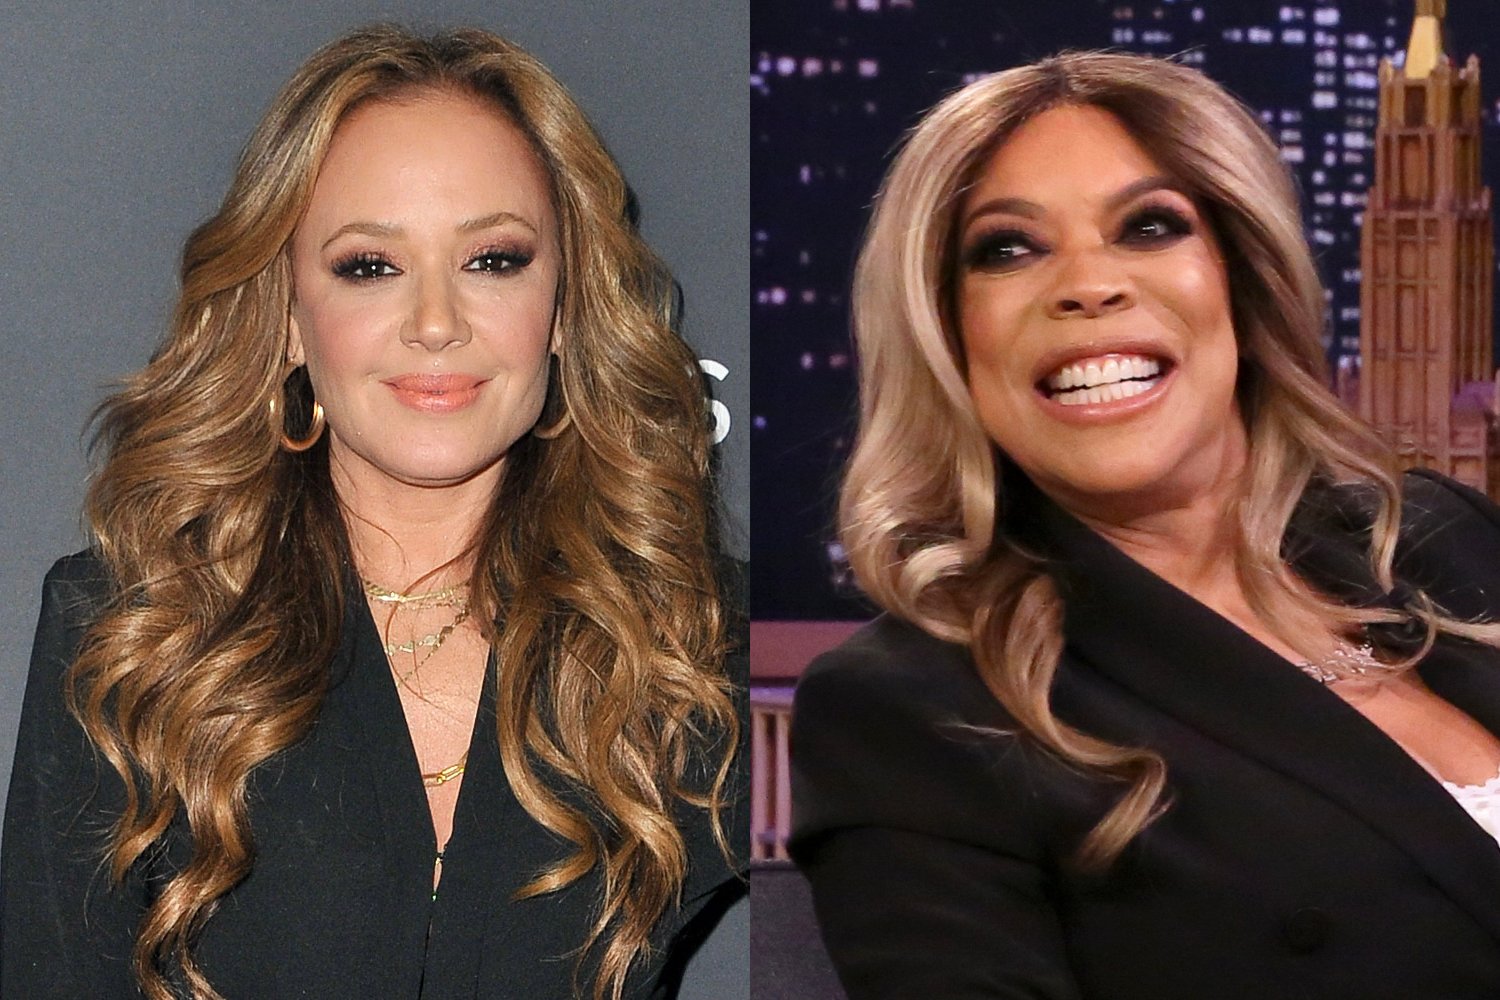 Leah Remini and Wendy Williams smiling